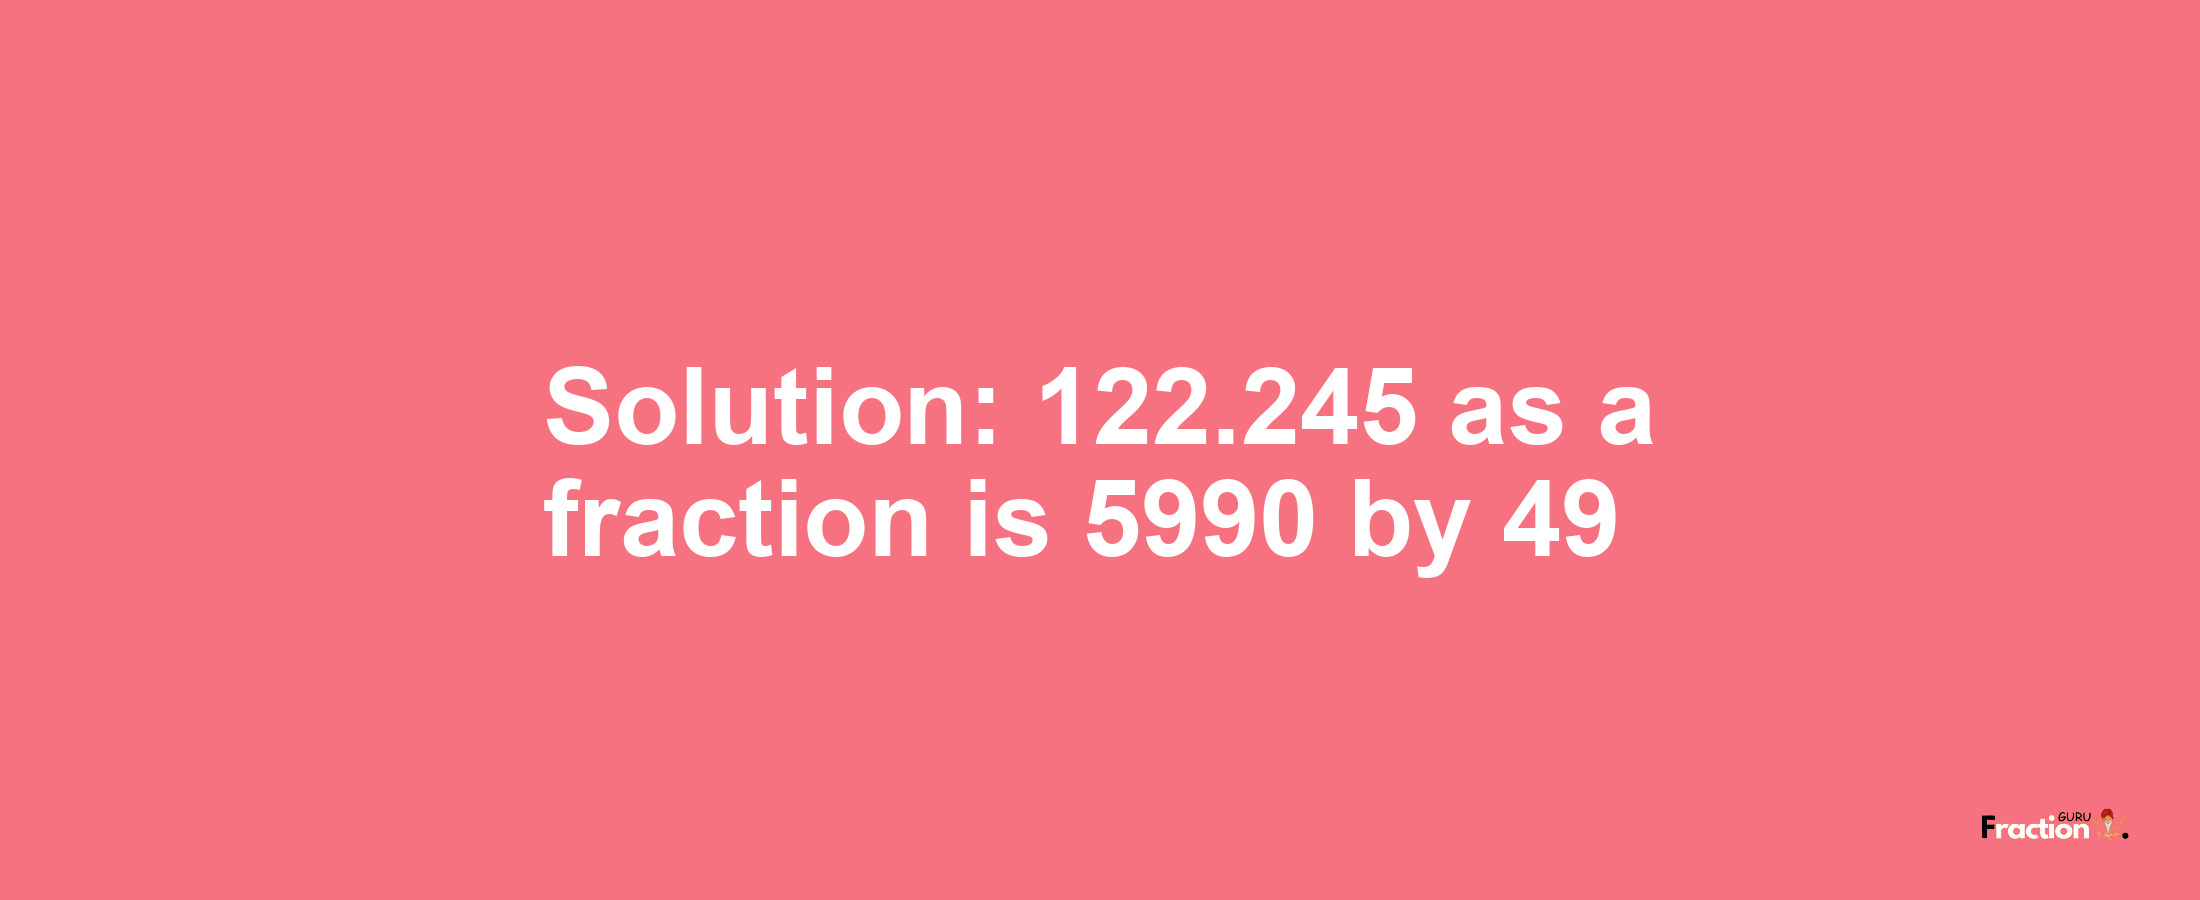 Solution:122.245 as a fraction is 5990/49